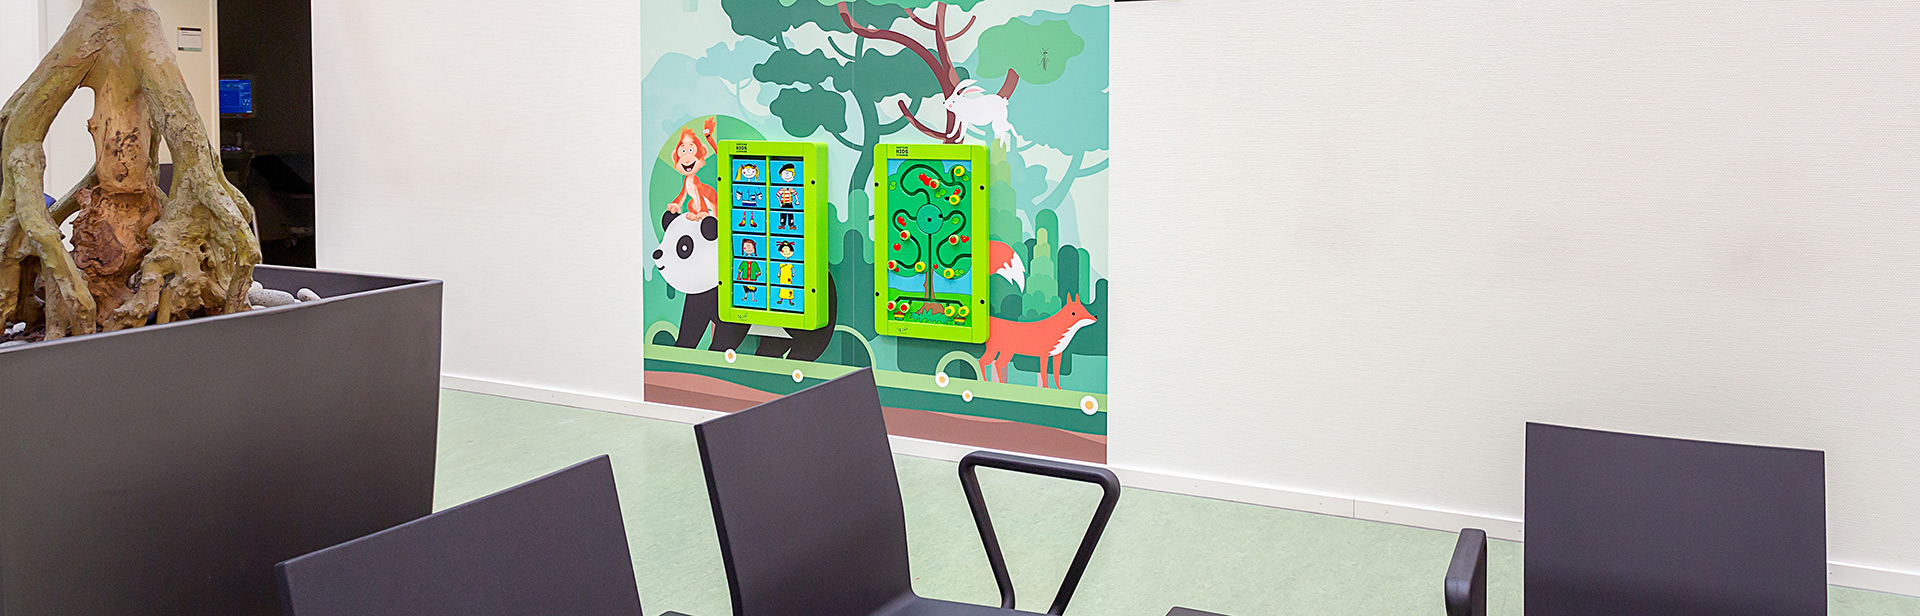 this image shows a kids corner with wall games in a hospital